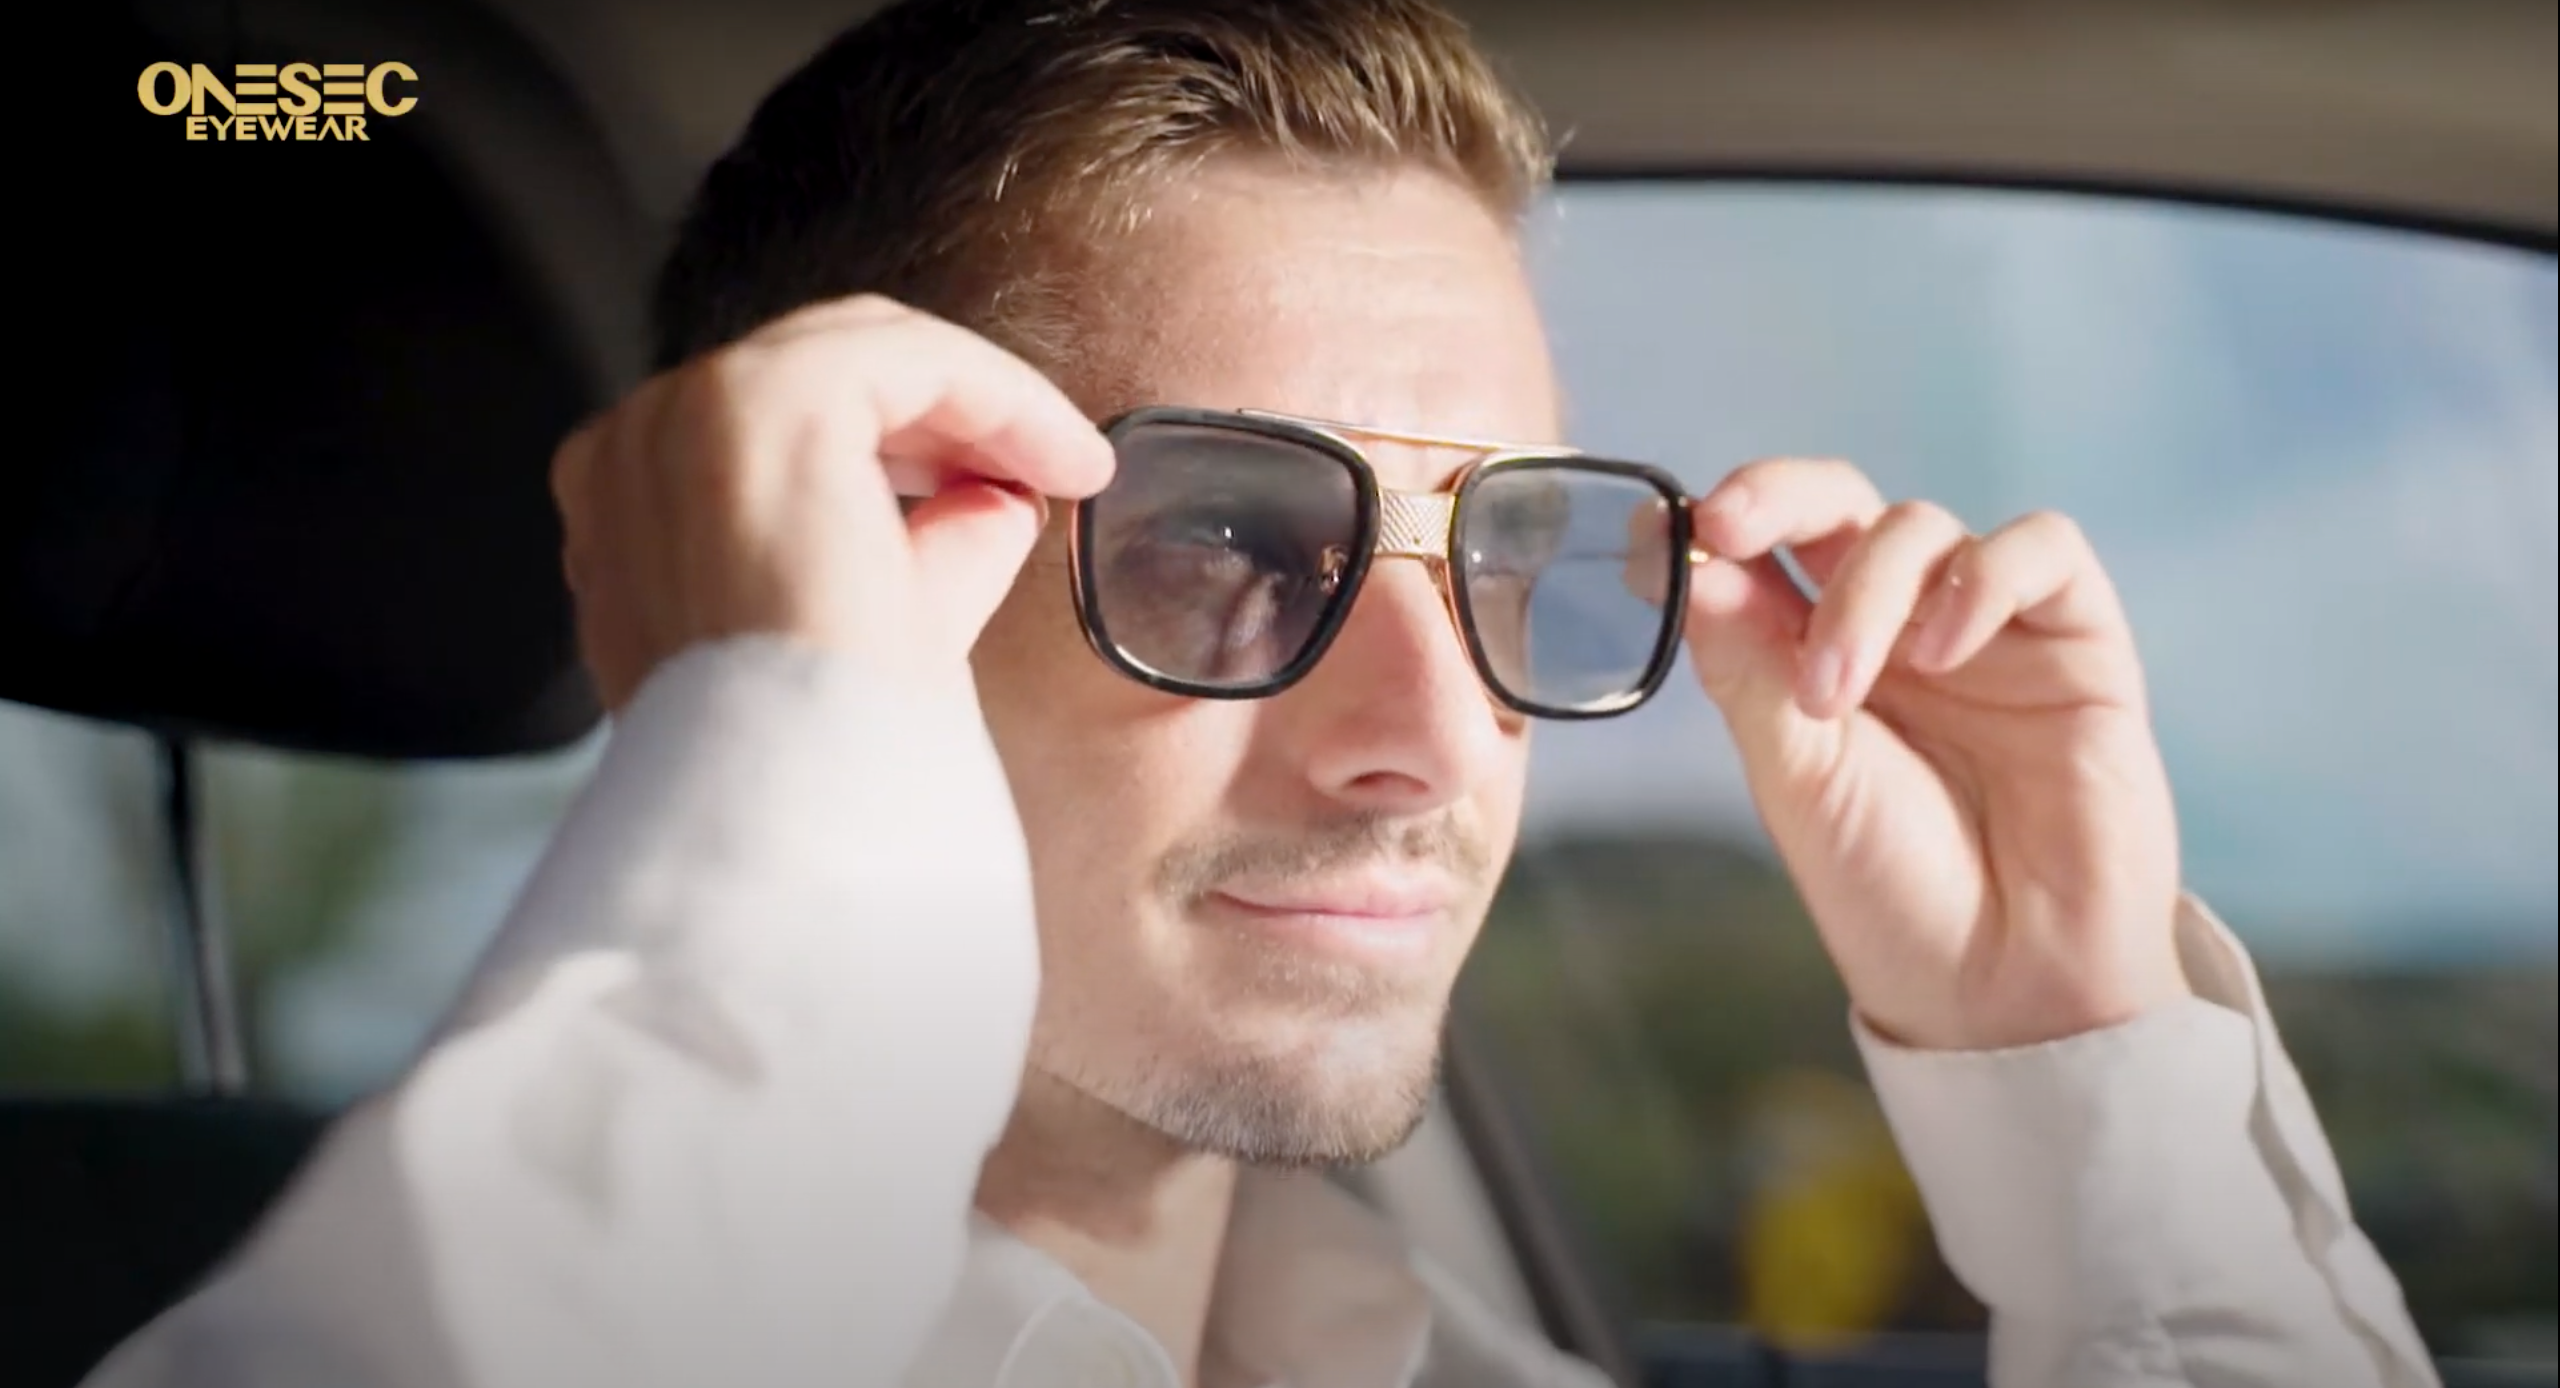 ONESEC Eyewear - From Shades to Specs in One Second